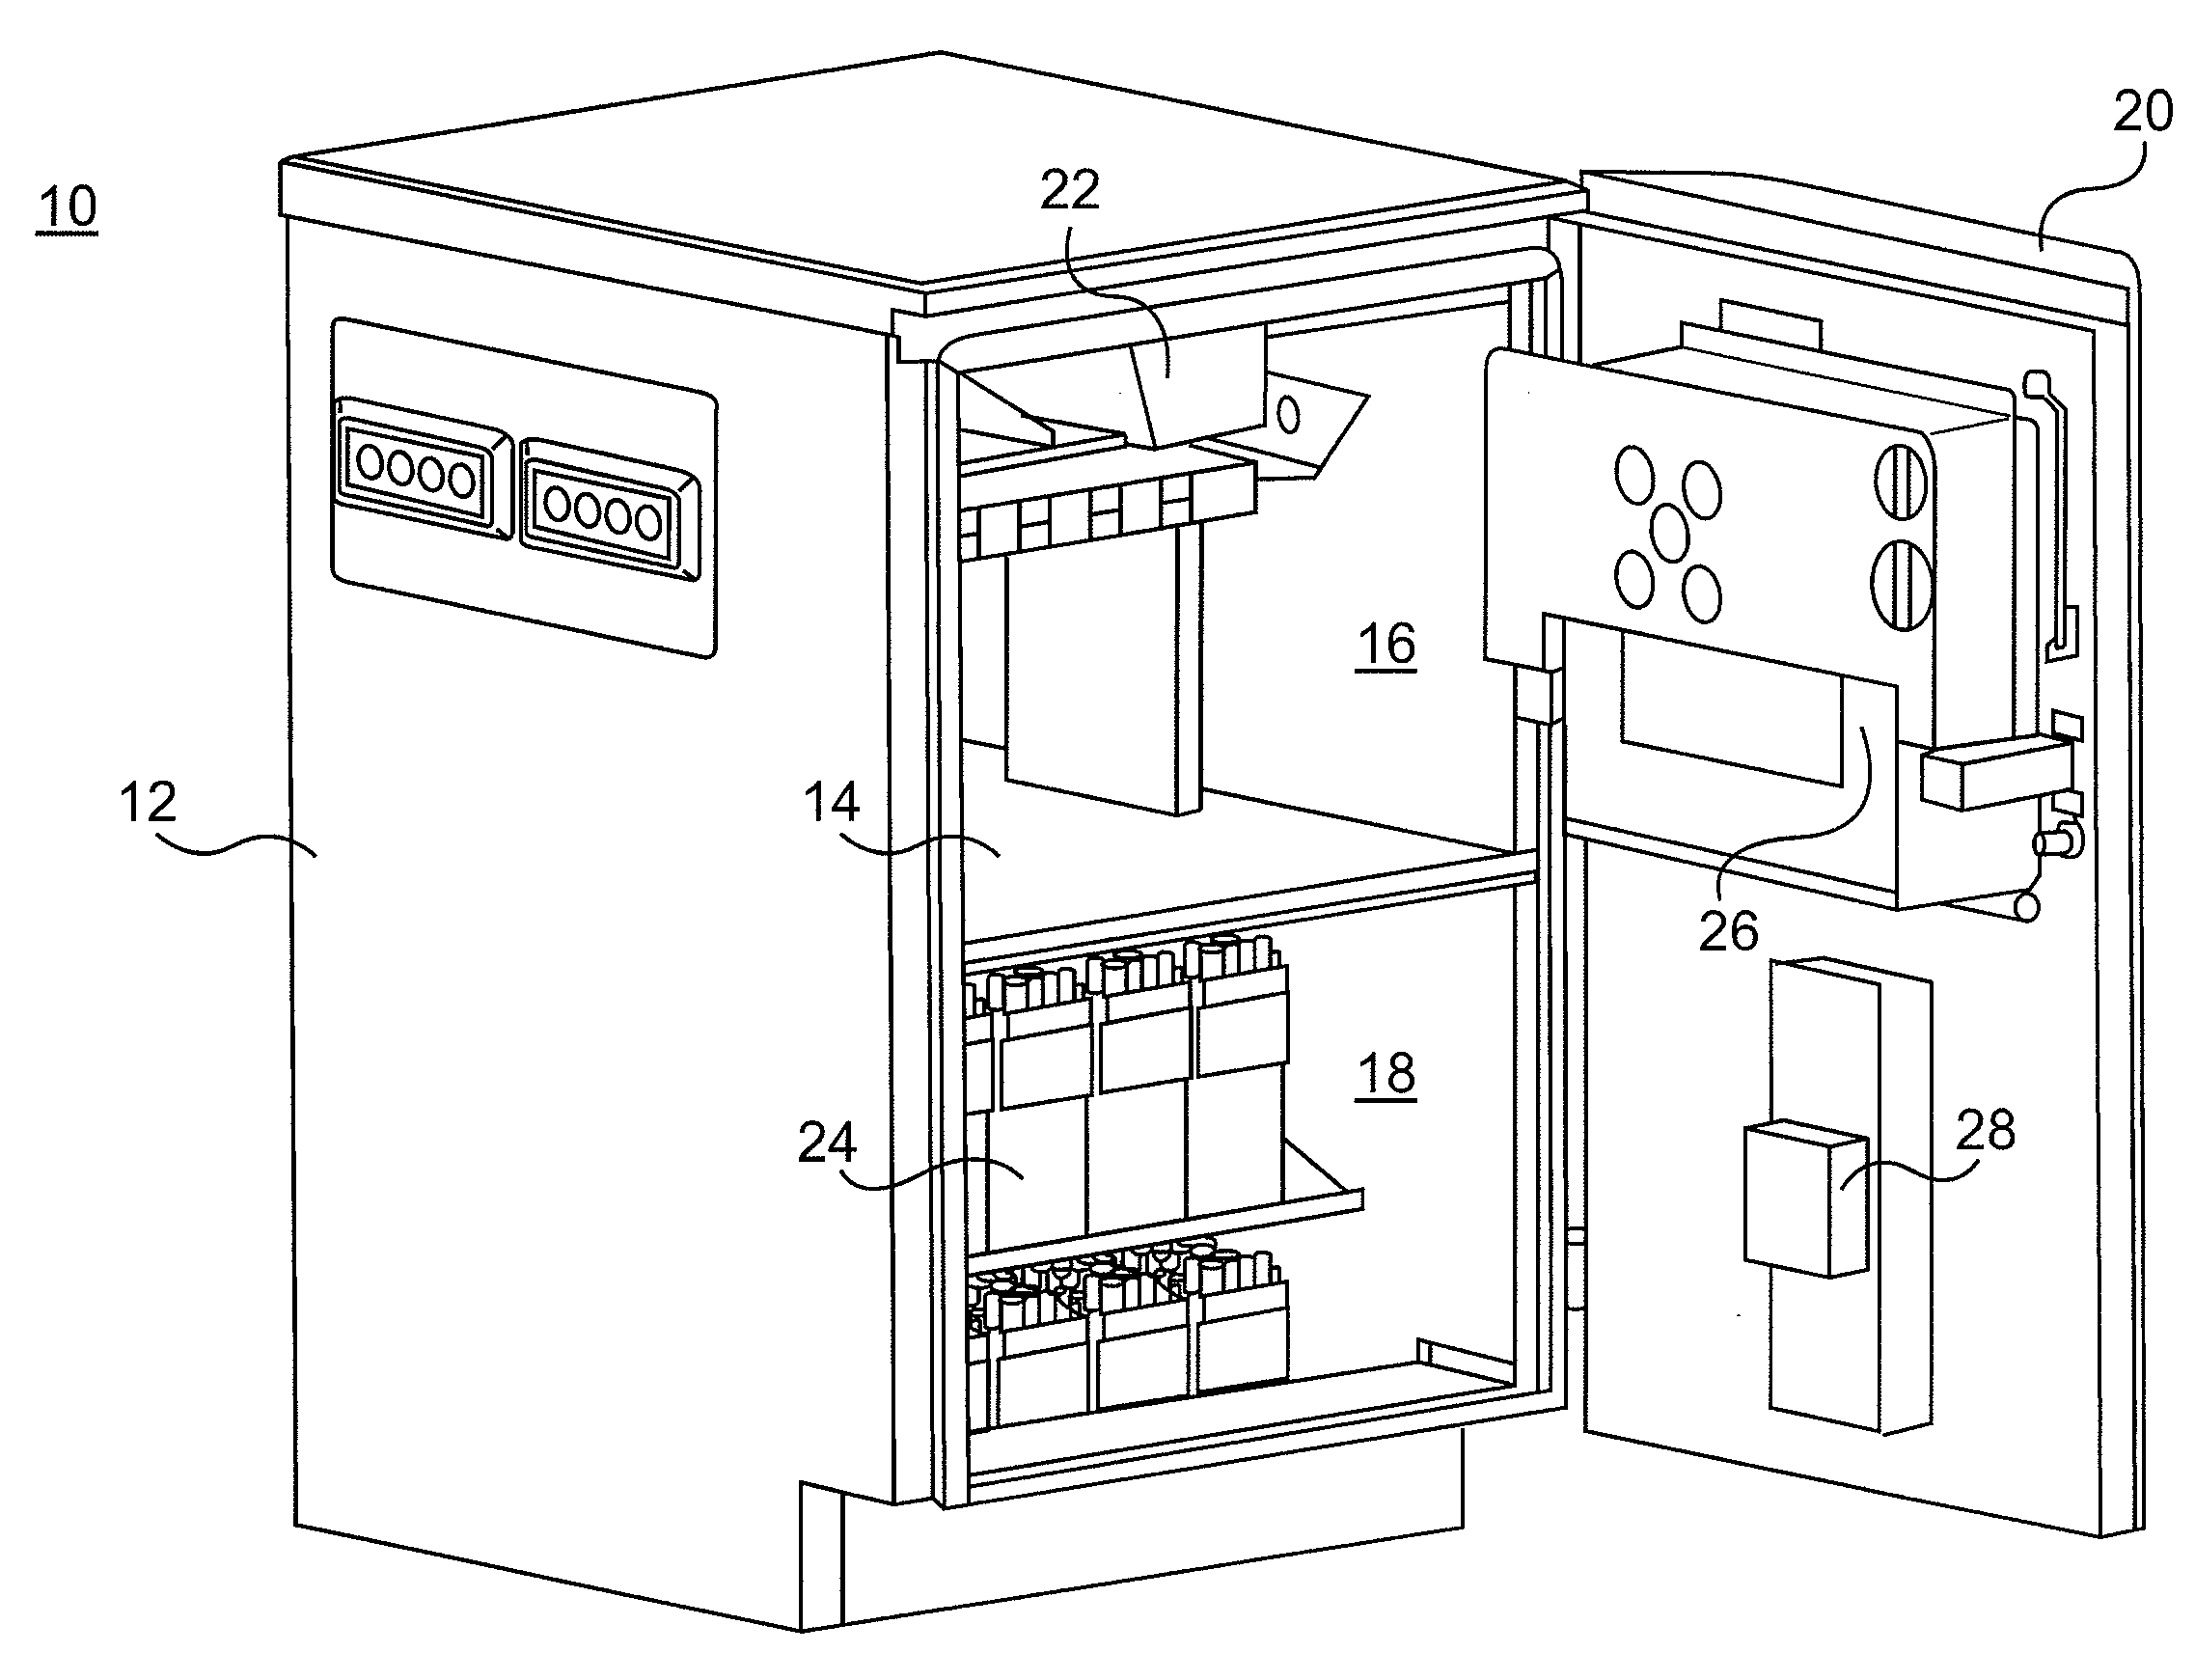 Hybrid cooling system for outdoor electronics enclosure